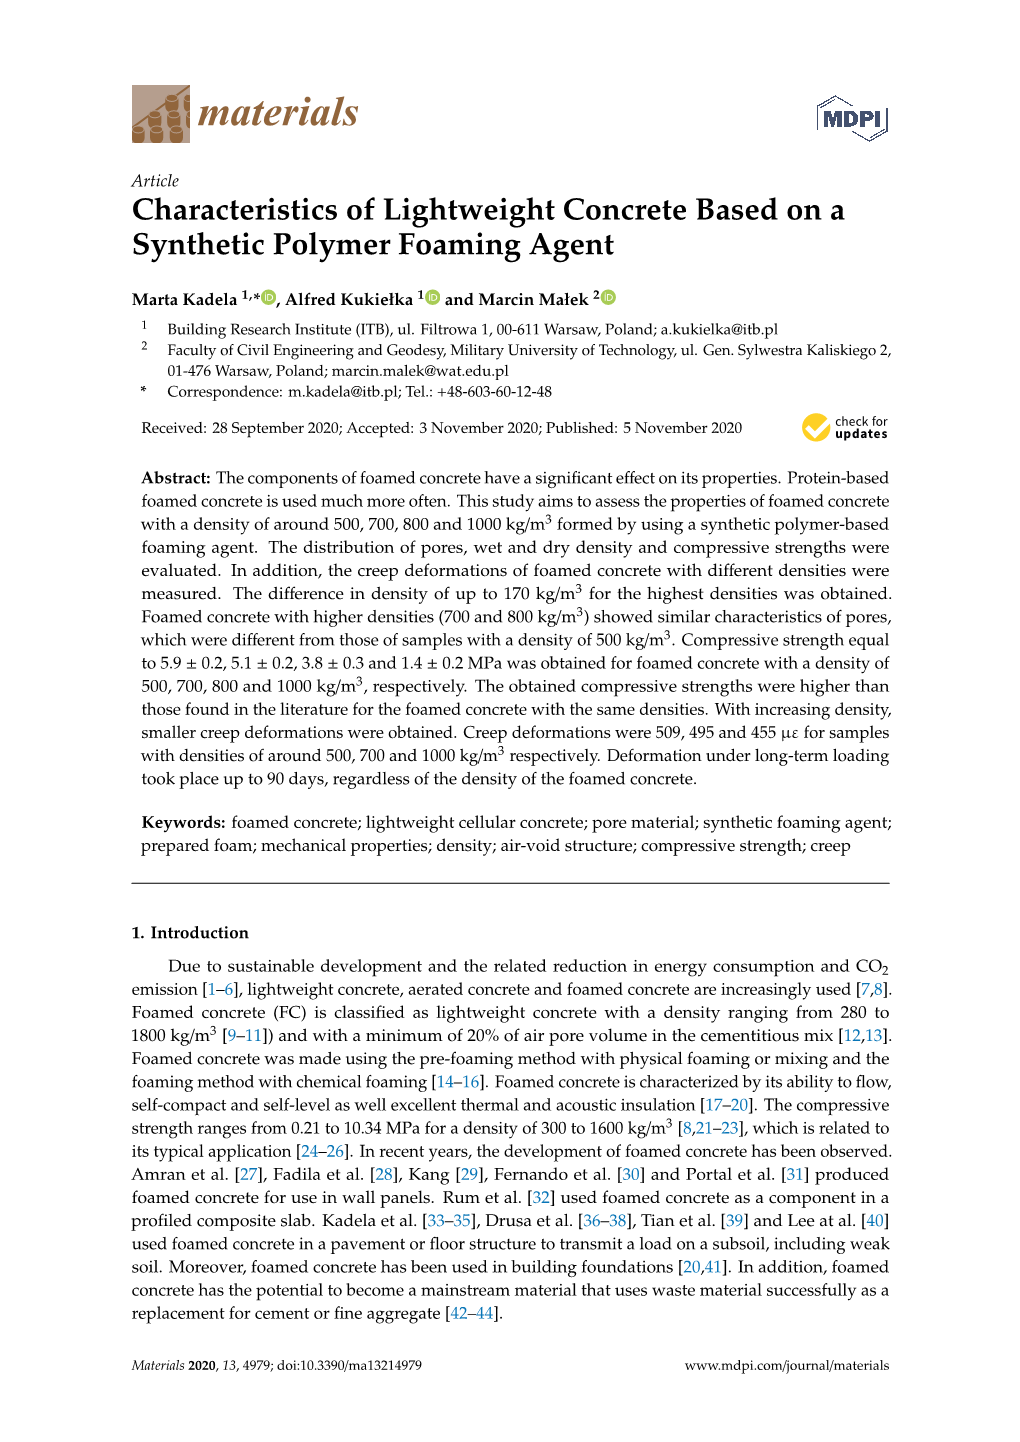 Characteristics of Lightweight Concrete Based on a Synthetic Polymer Foaming Agent